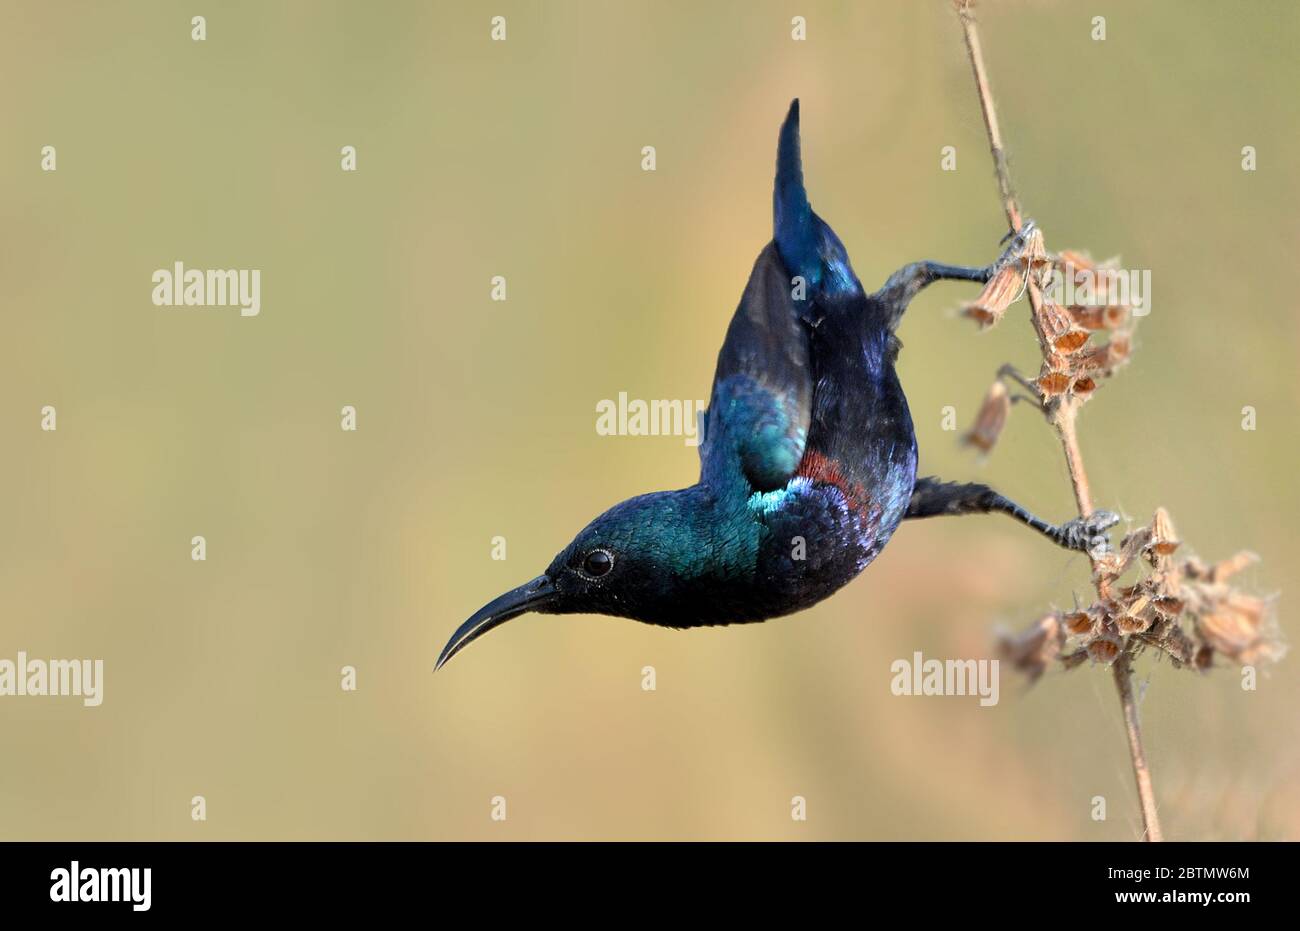 The purple sunbird is a small bird in the sunbird family found mainly in South and Southeast Asia but extending west into parts of the Arabian peninsu Stock Photo